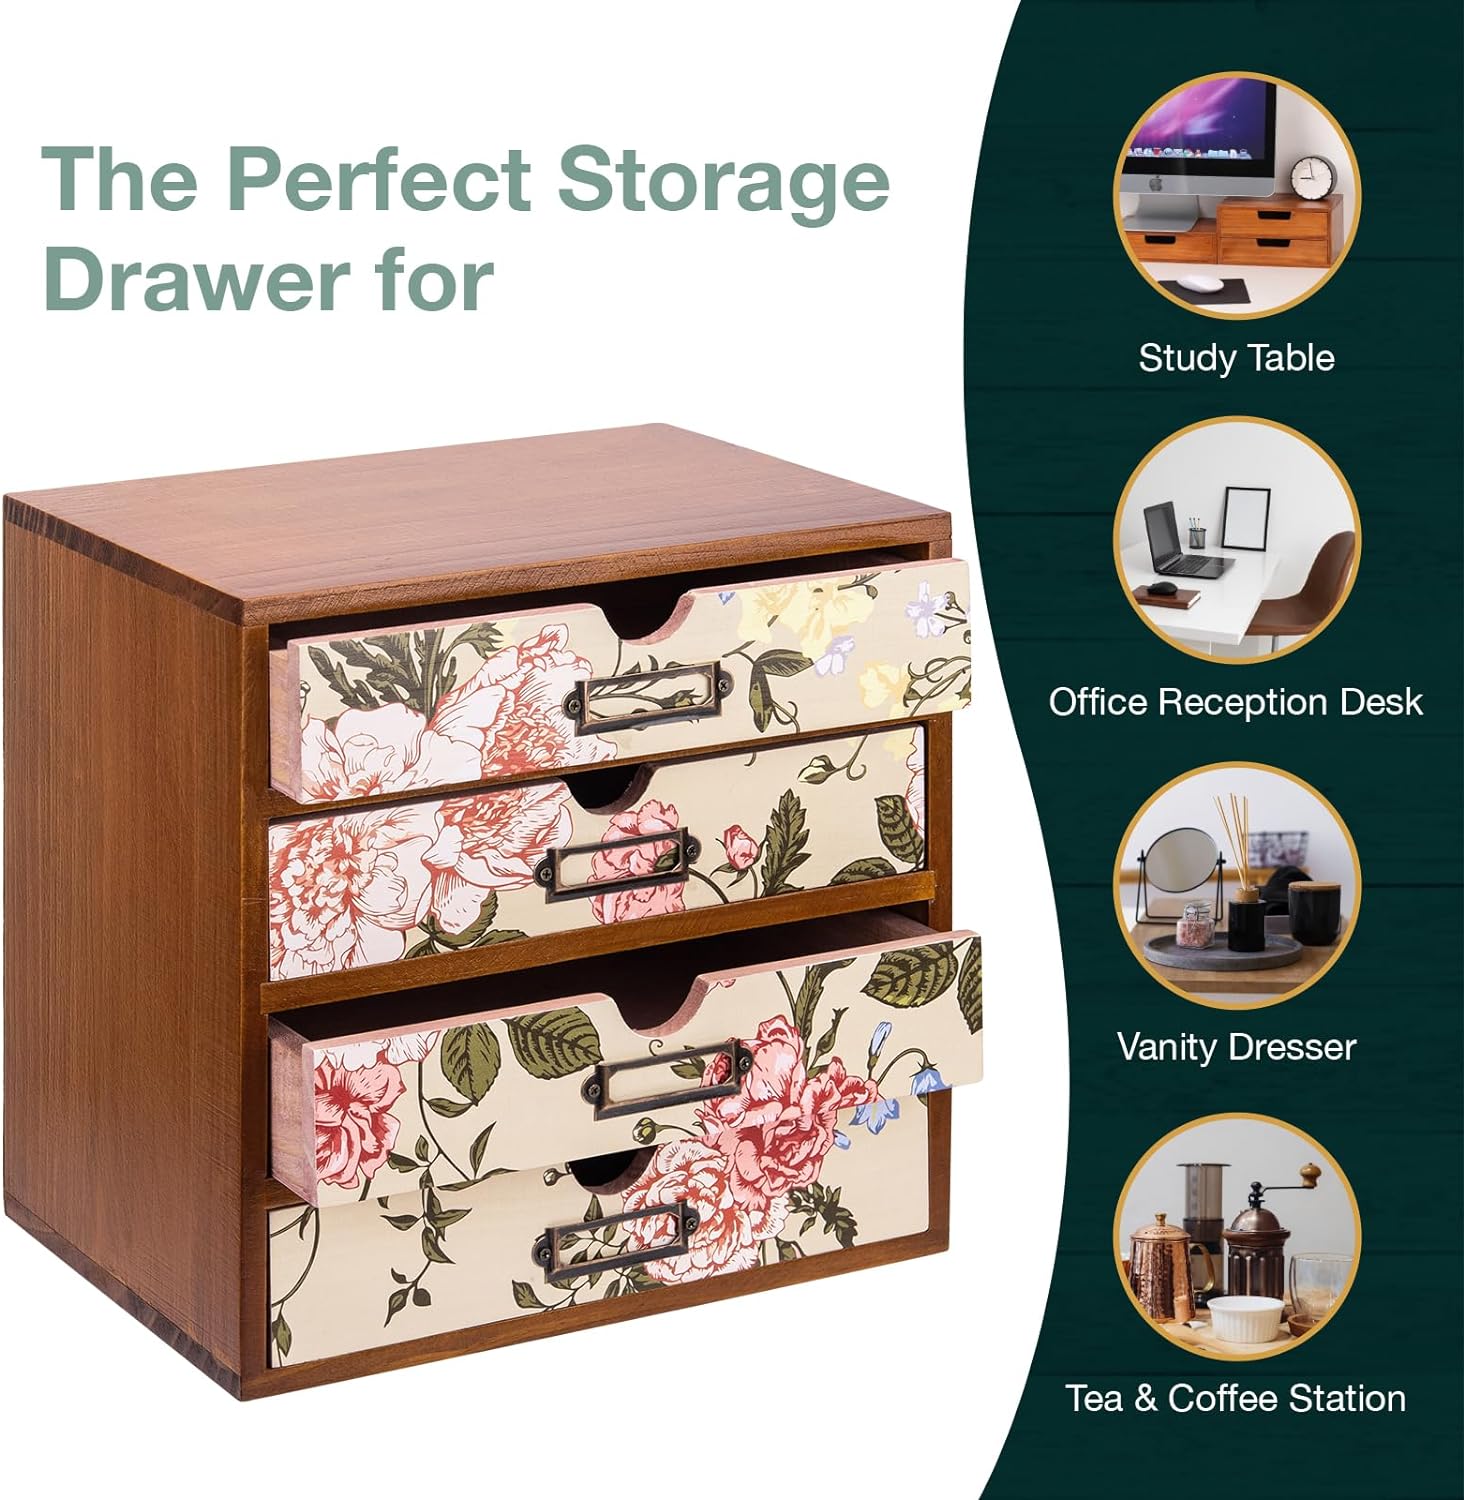 Load image into Gallery viewer, Vintage Desk Organizer with Vintage Off White Floral Drawers - Wooden Storage Drawers for Tabletop